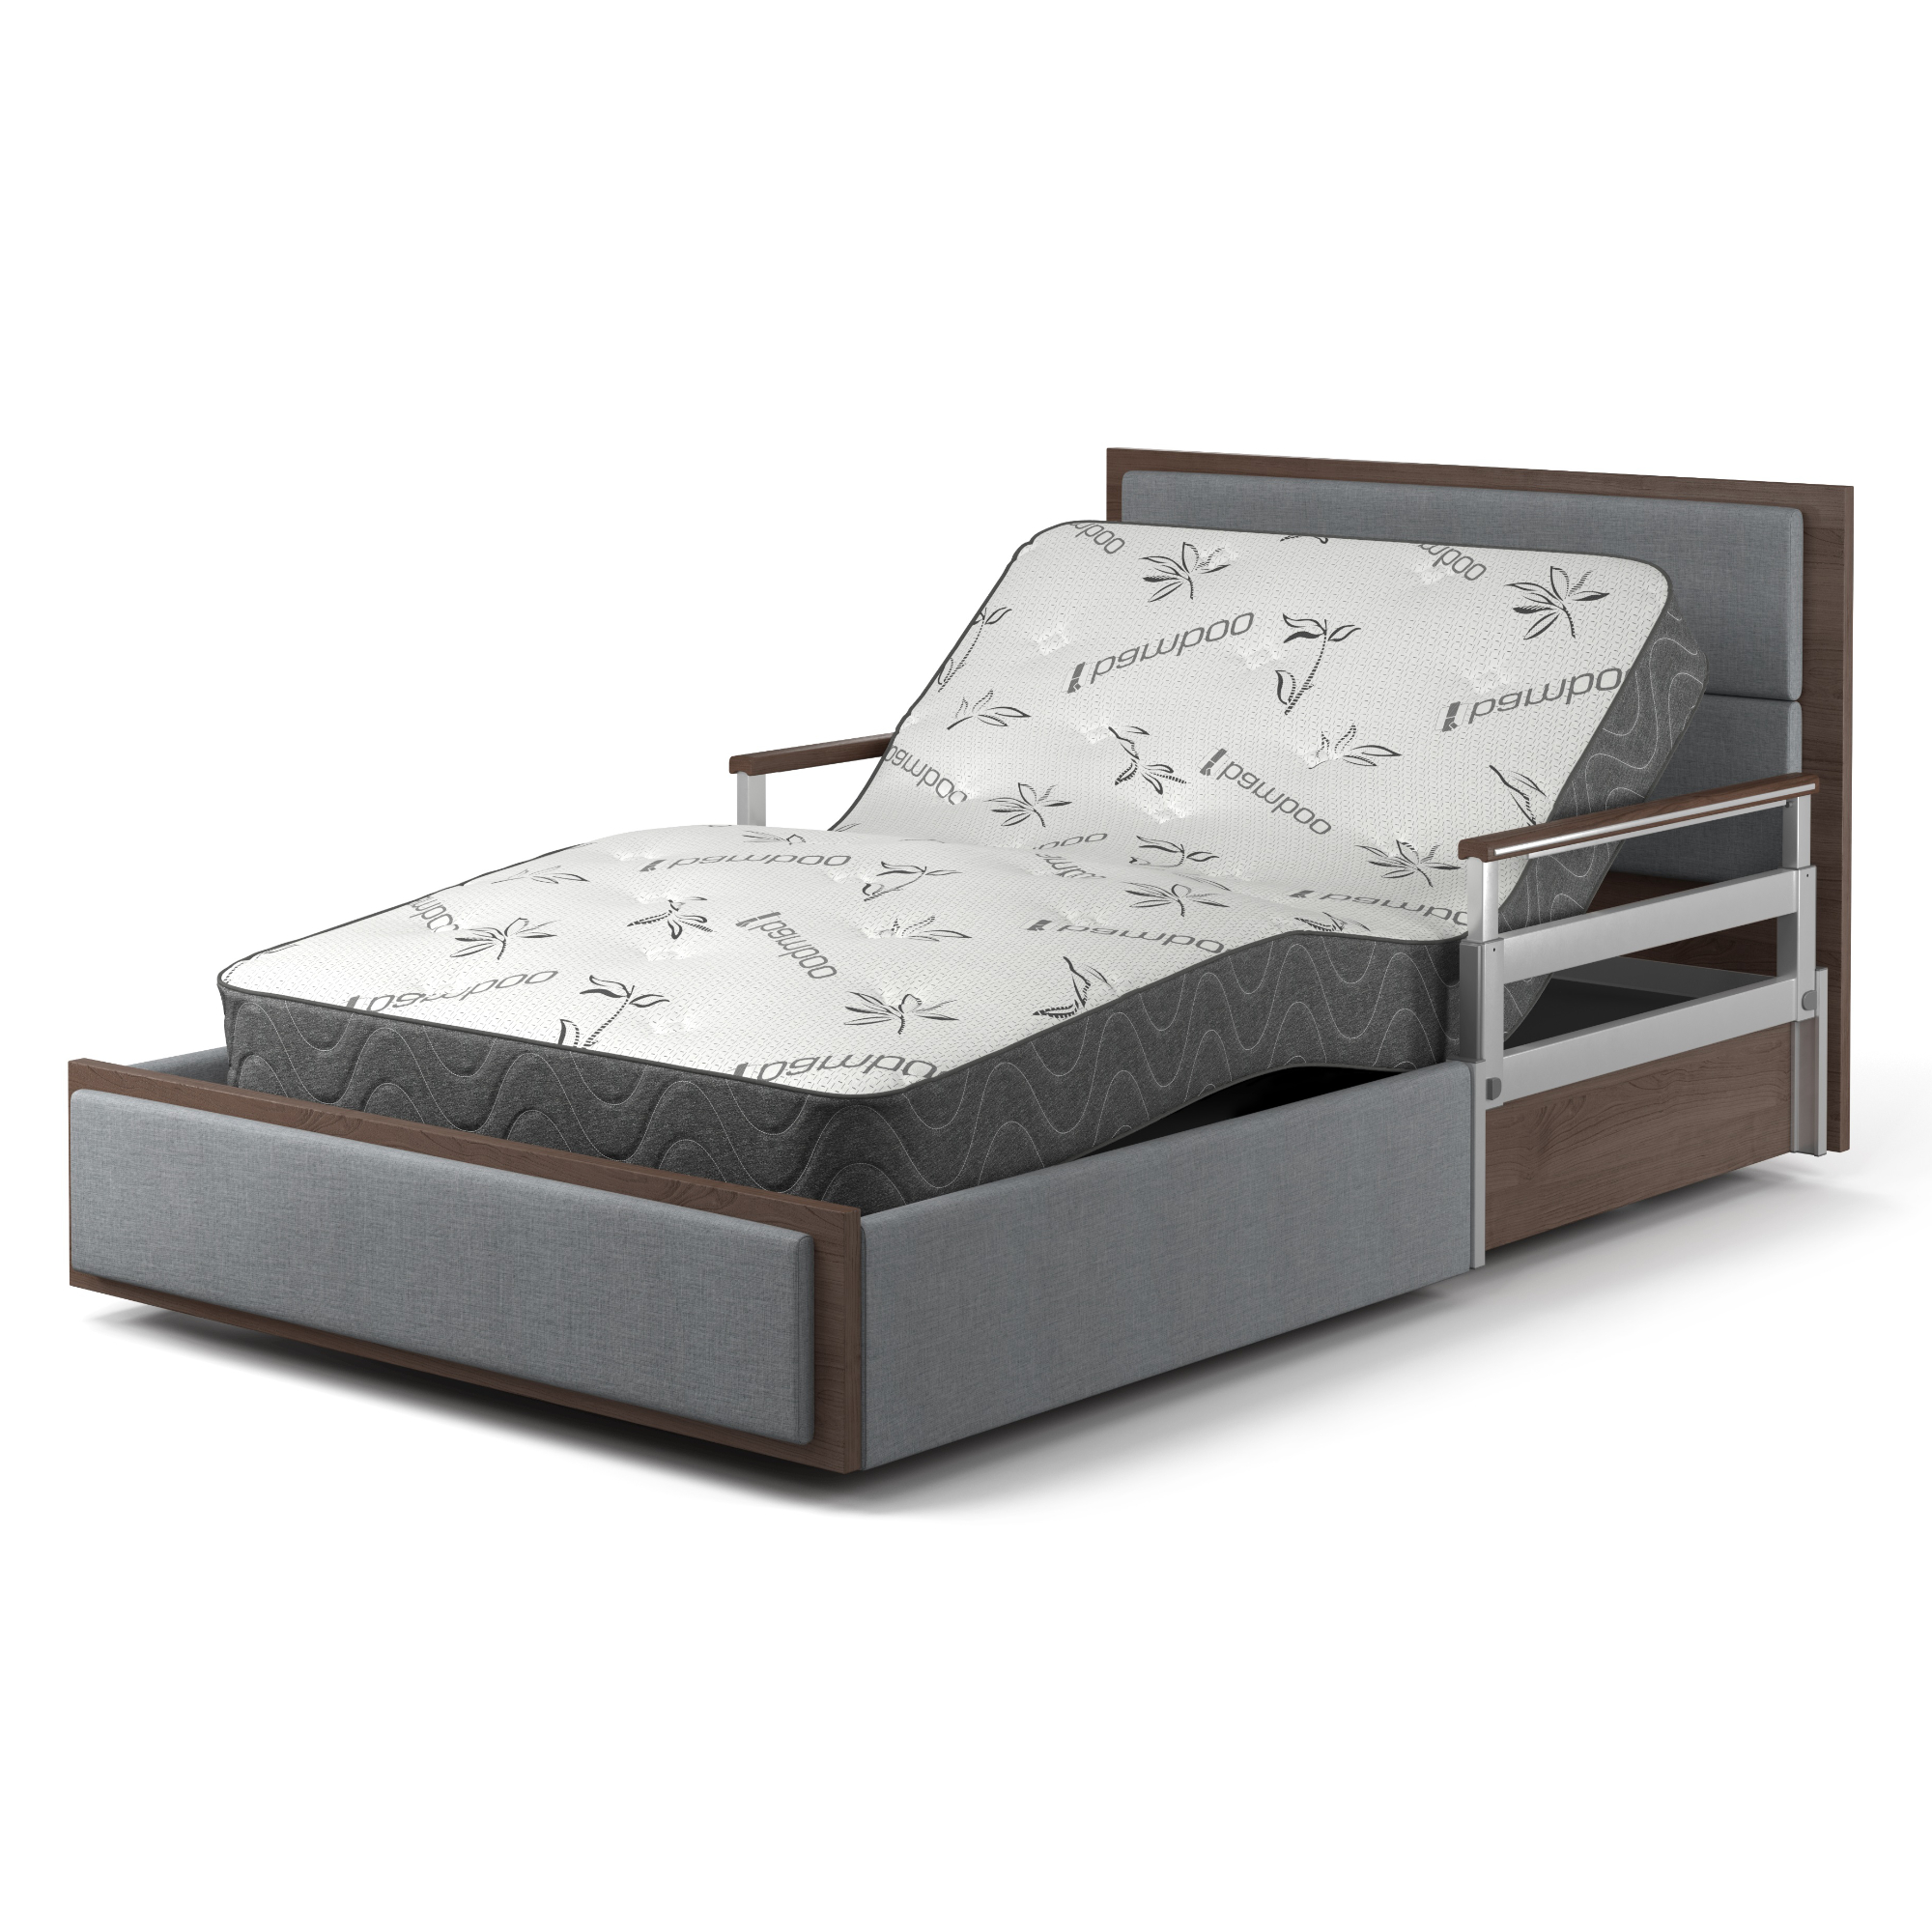 A SonderCare Aura™ Platinum Wide Hospital Bed with a mattress on top of it.